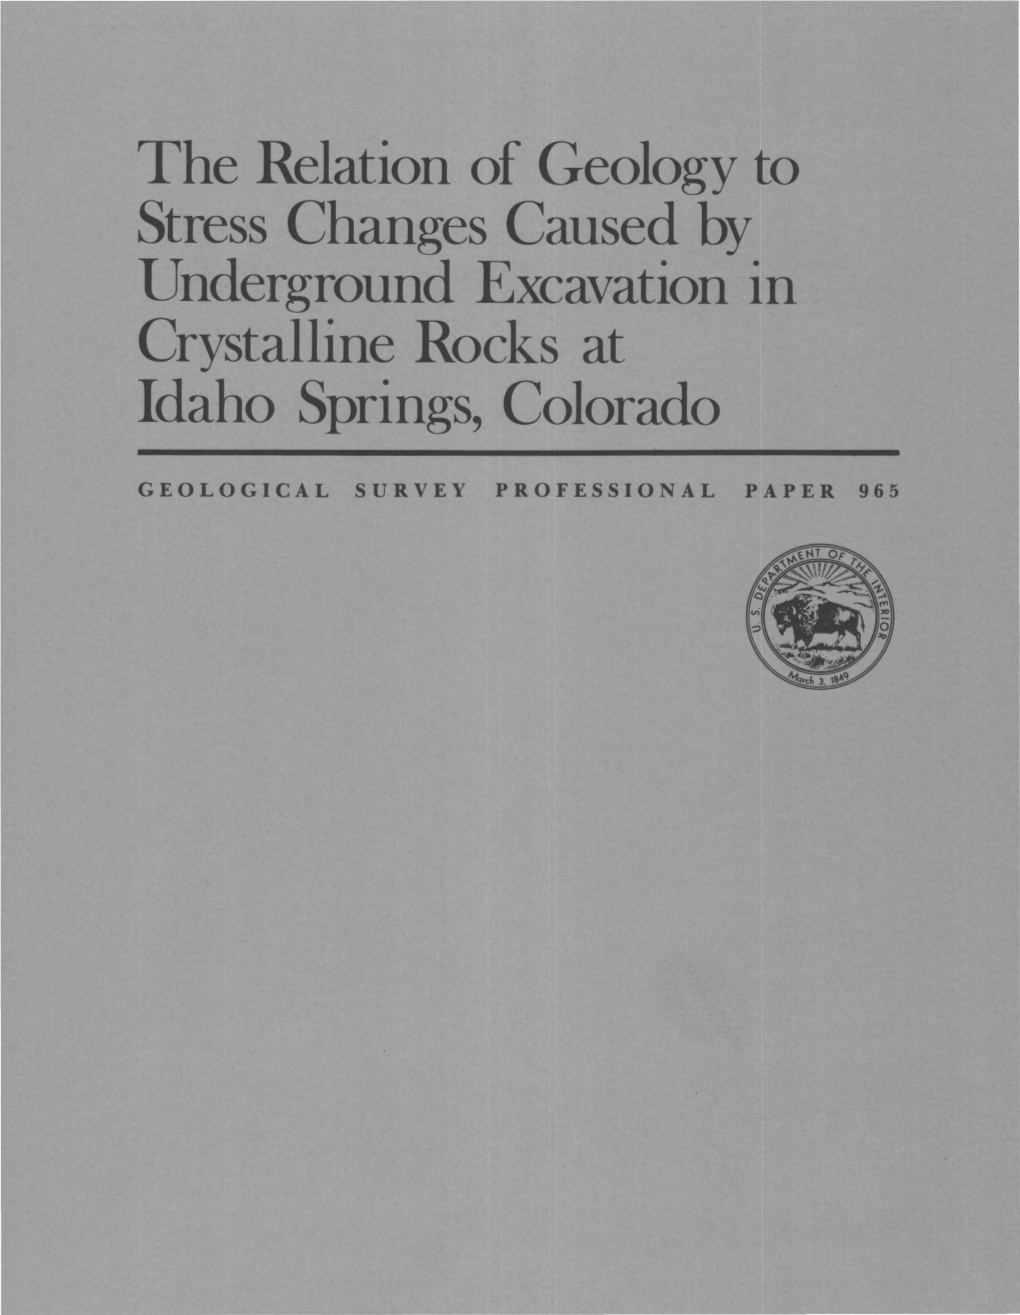 The Relation of Geology to Stress Changes Caused by Underground Excavation in Crystalline Rocks at Idaho Springs, Colorado